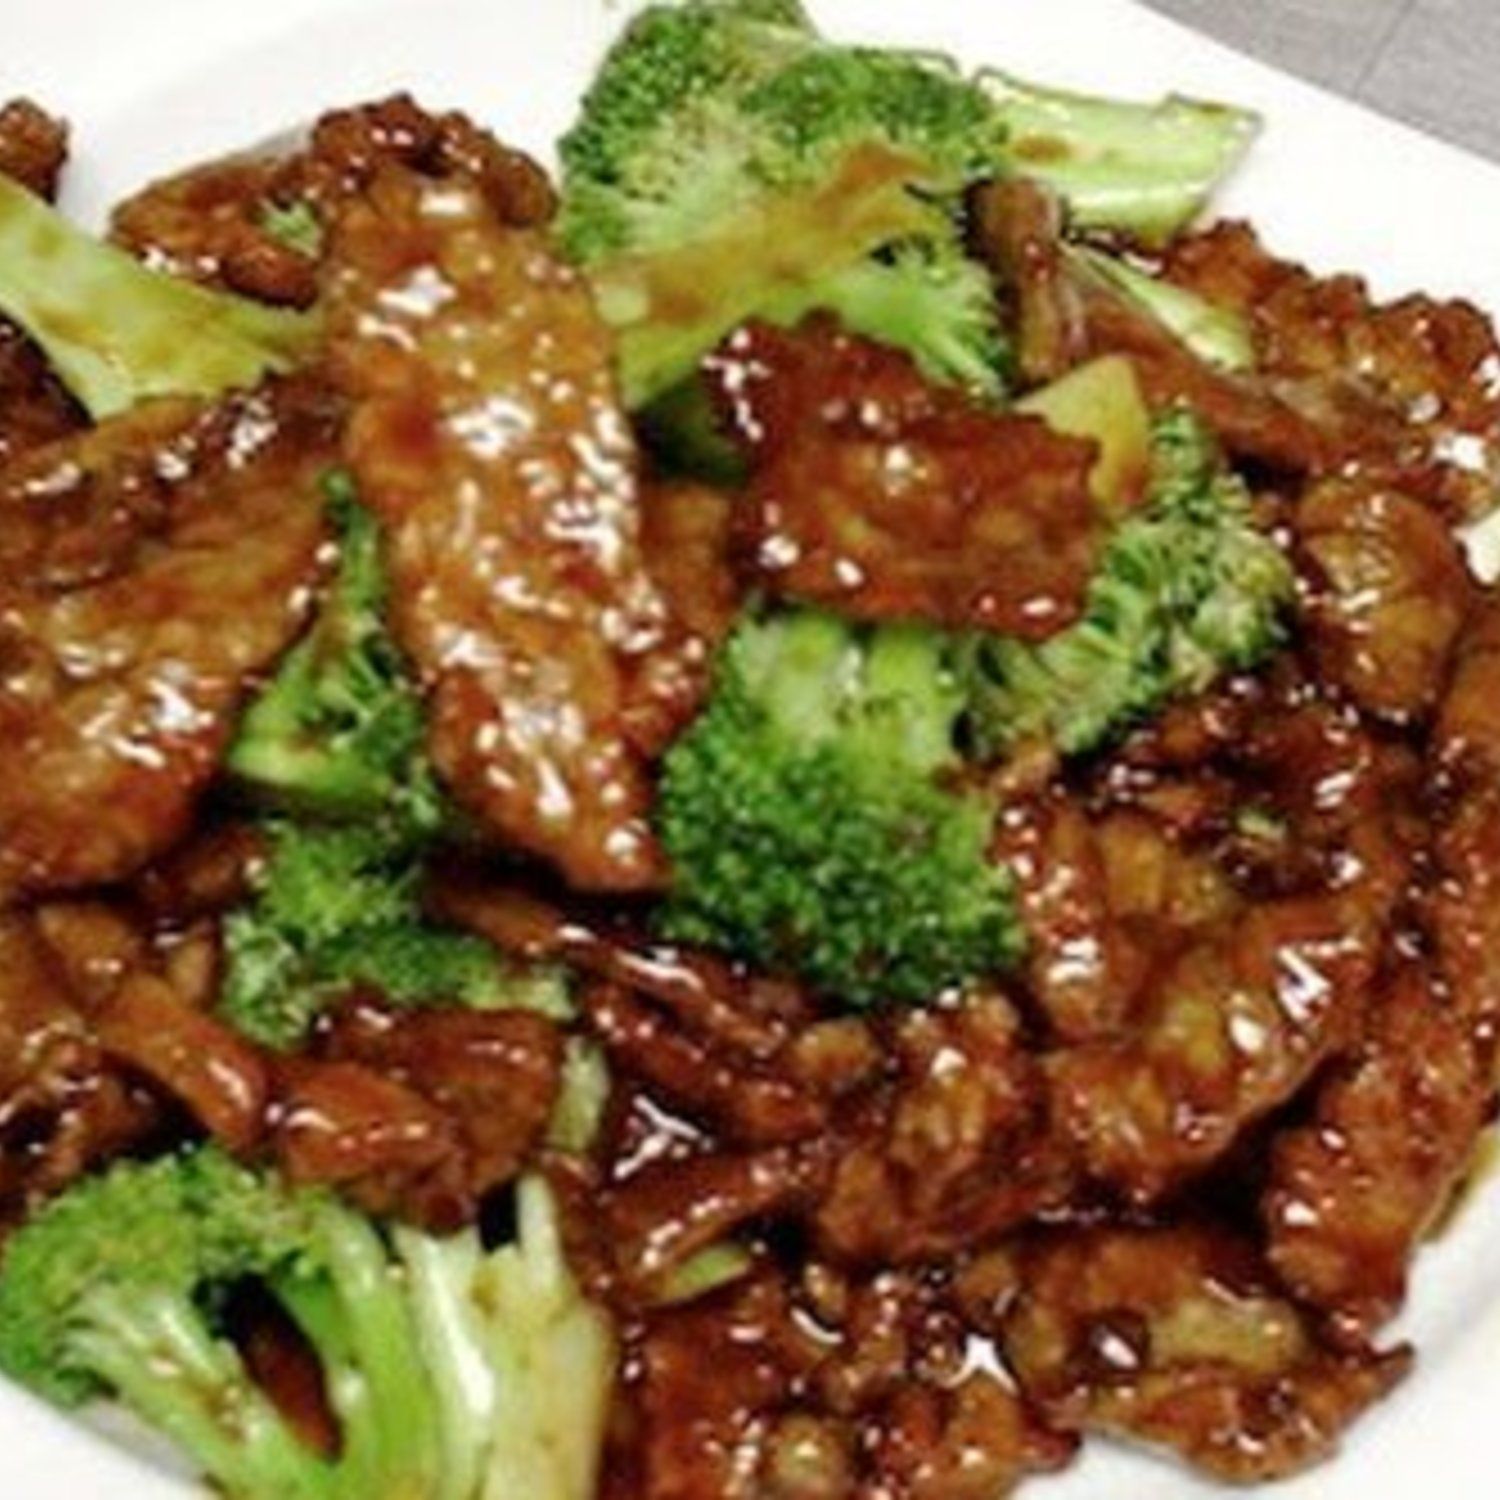 Crock Pot Beef and Broccoli. Absolutely delicious. Just if youre planning on having leftovers, only add in as much broccoli as you want to have for the first meal. The leftovers with day-old